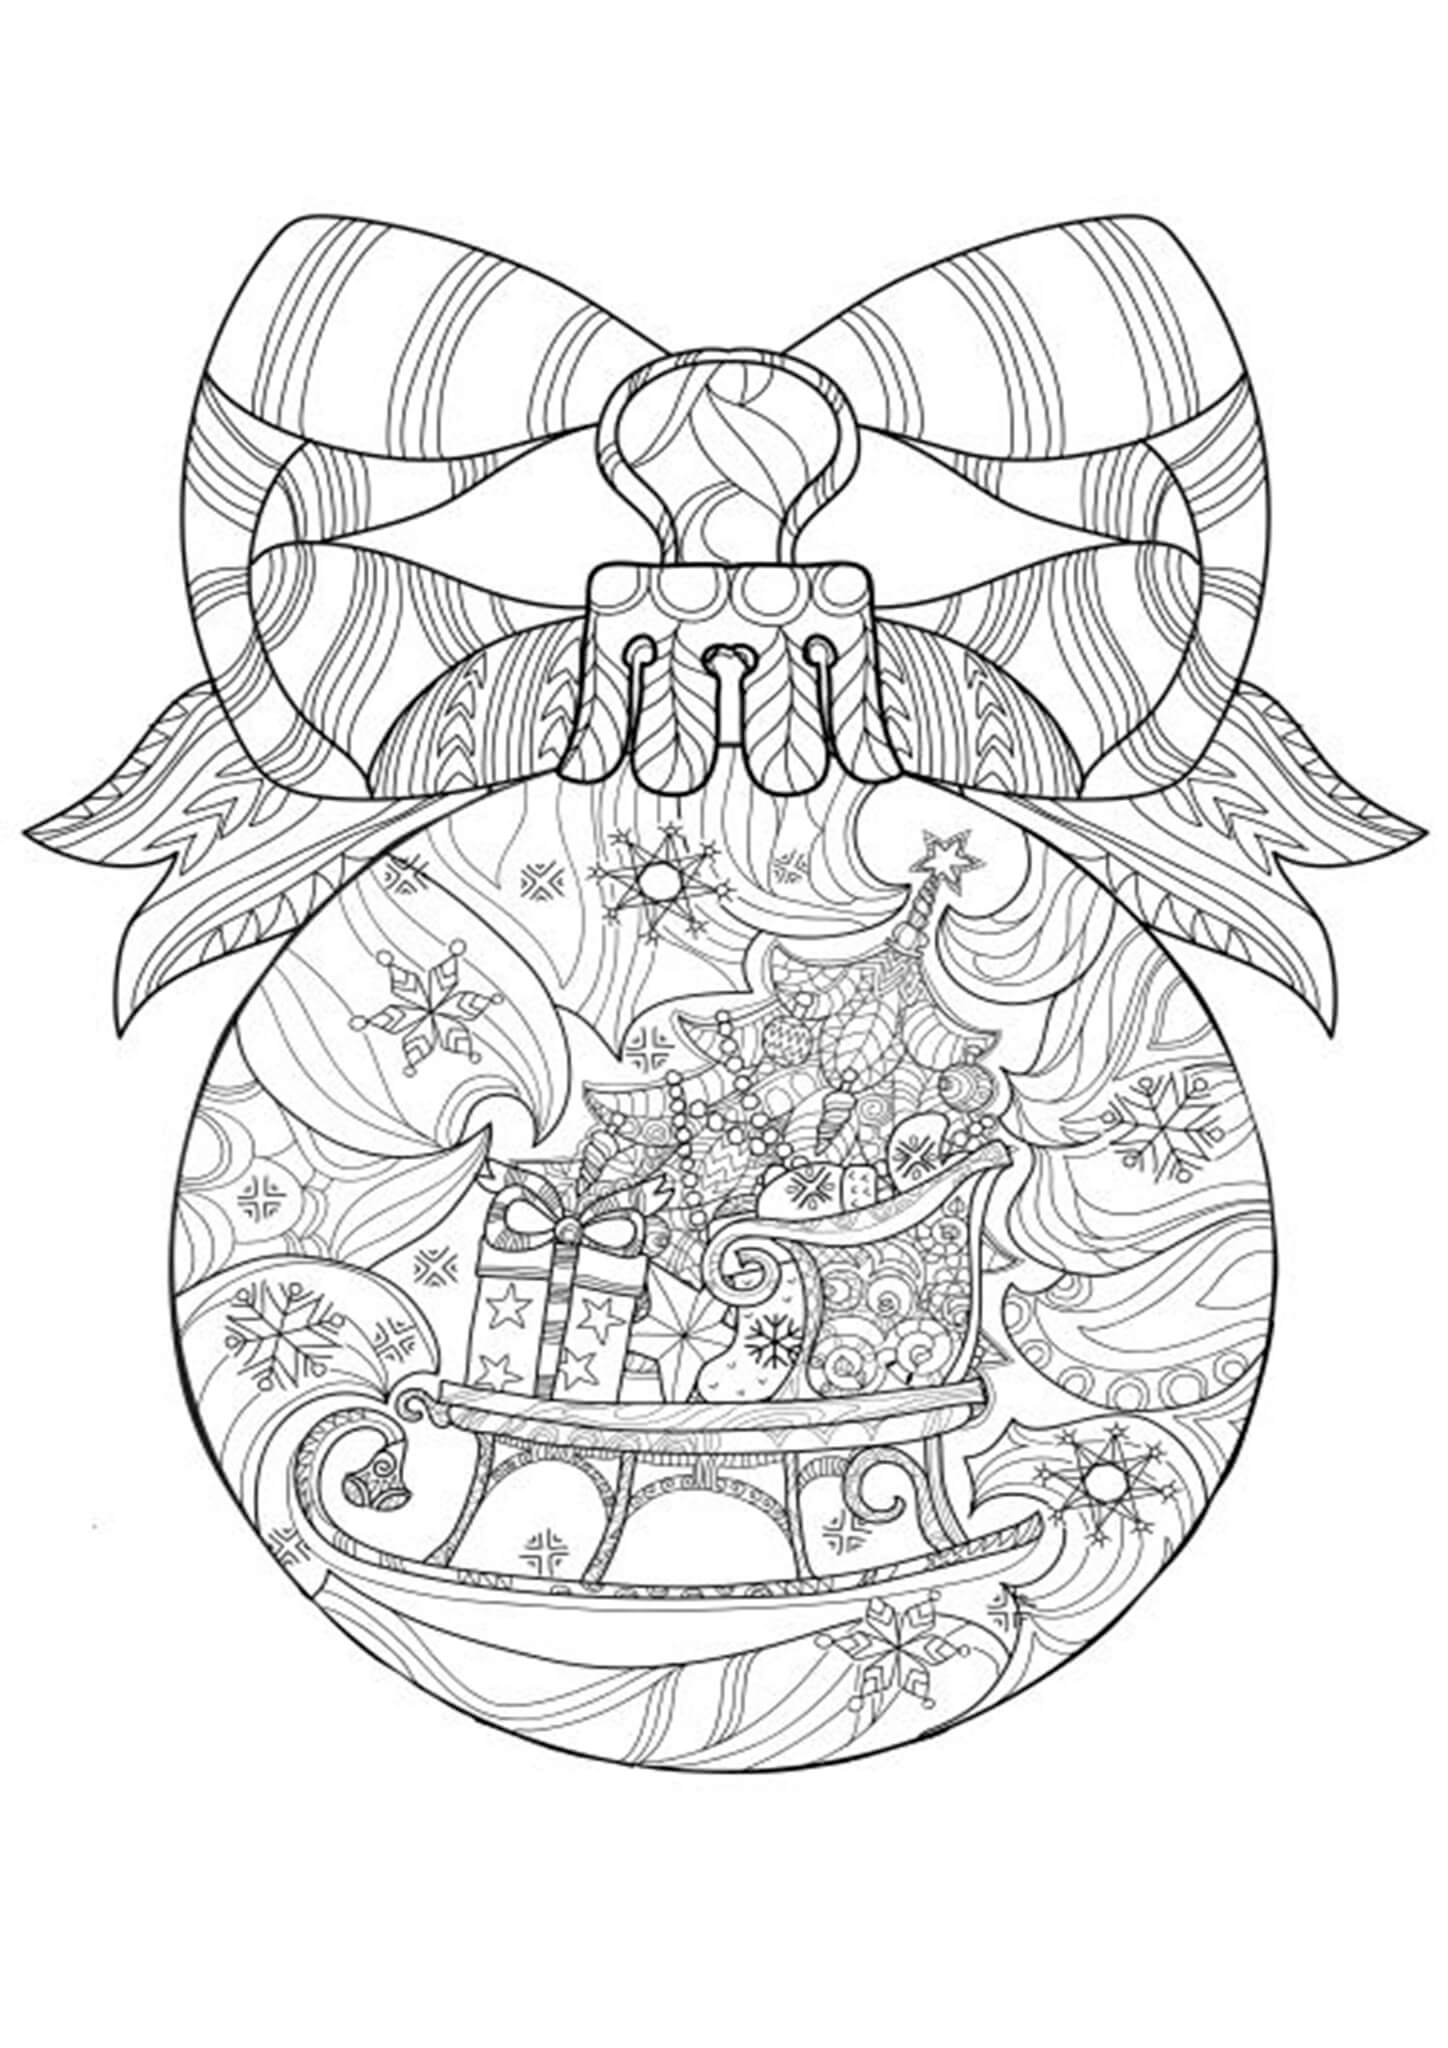 Xmas Colouring Pages For Adults